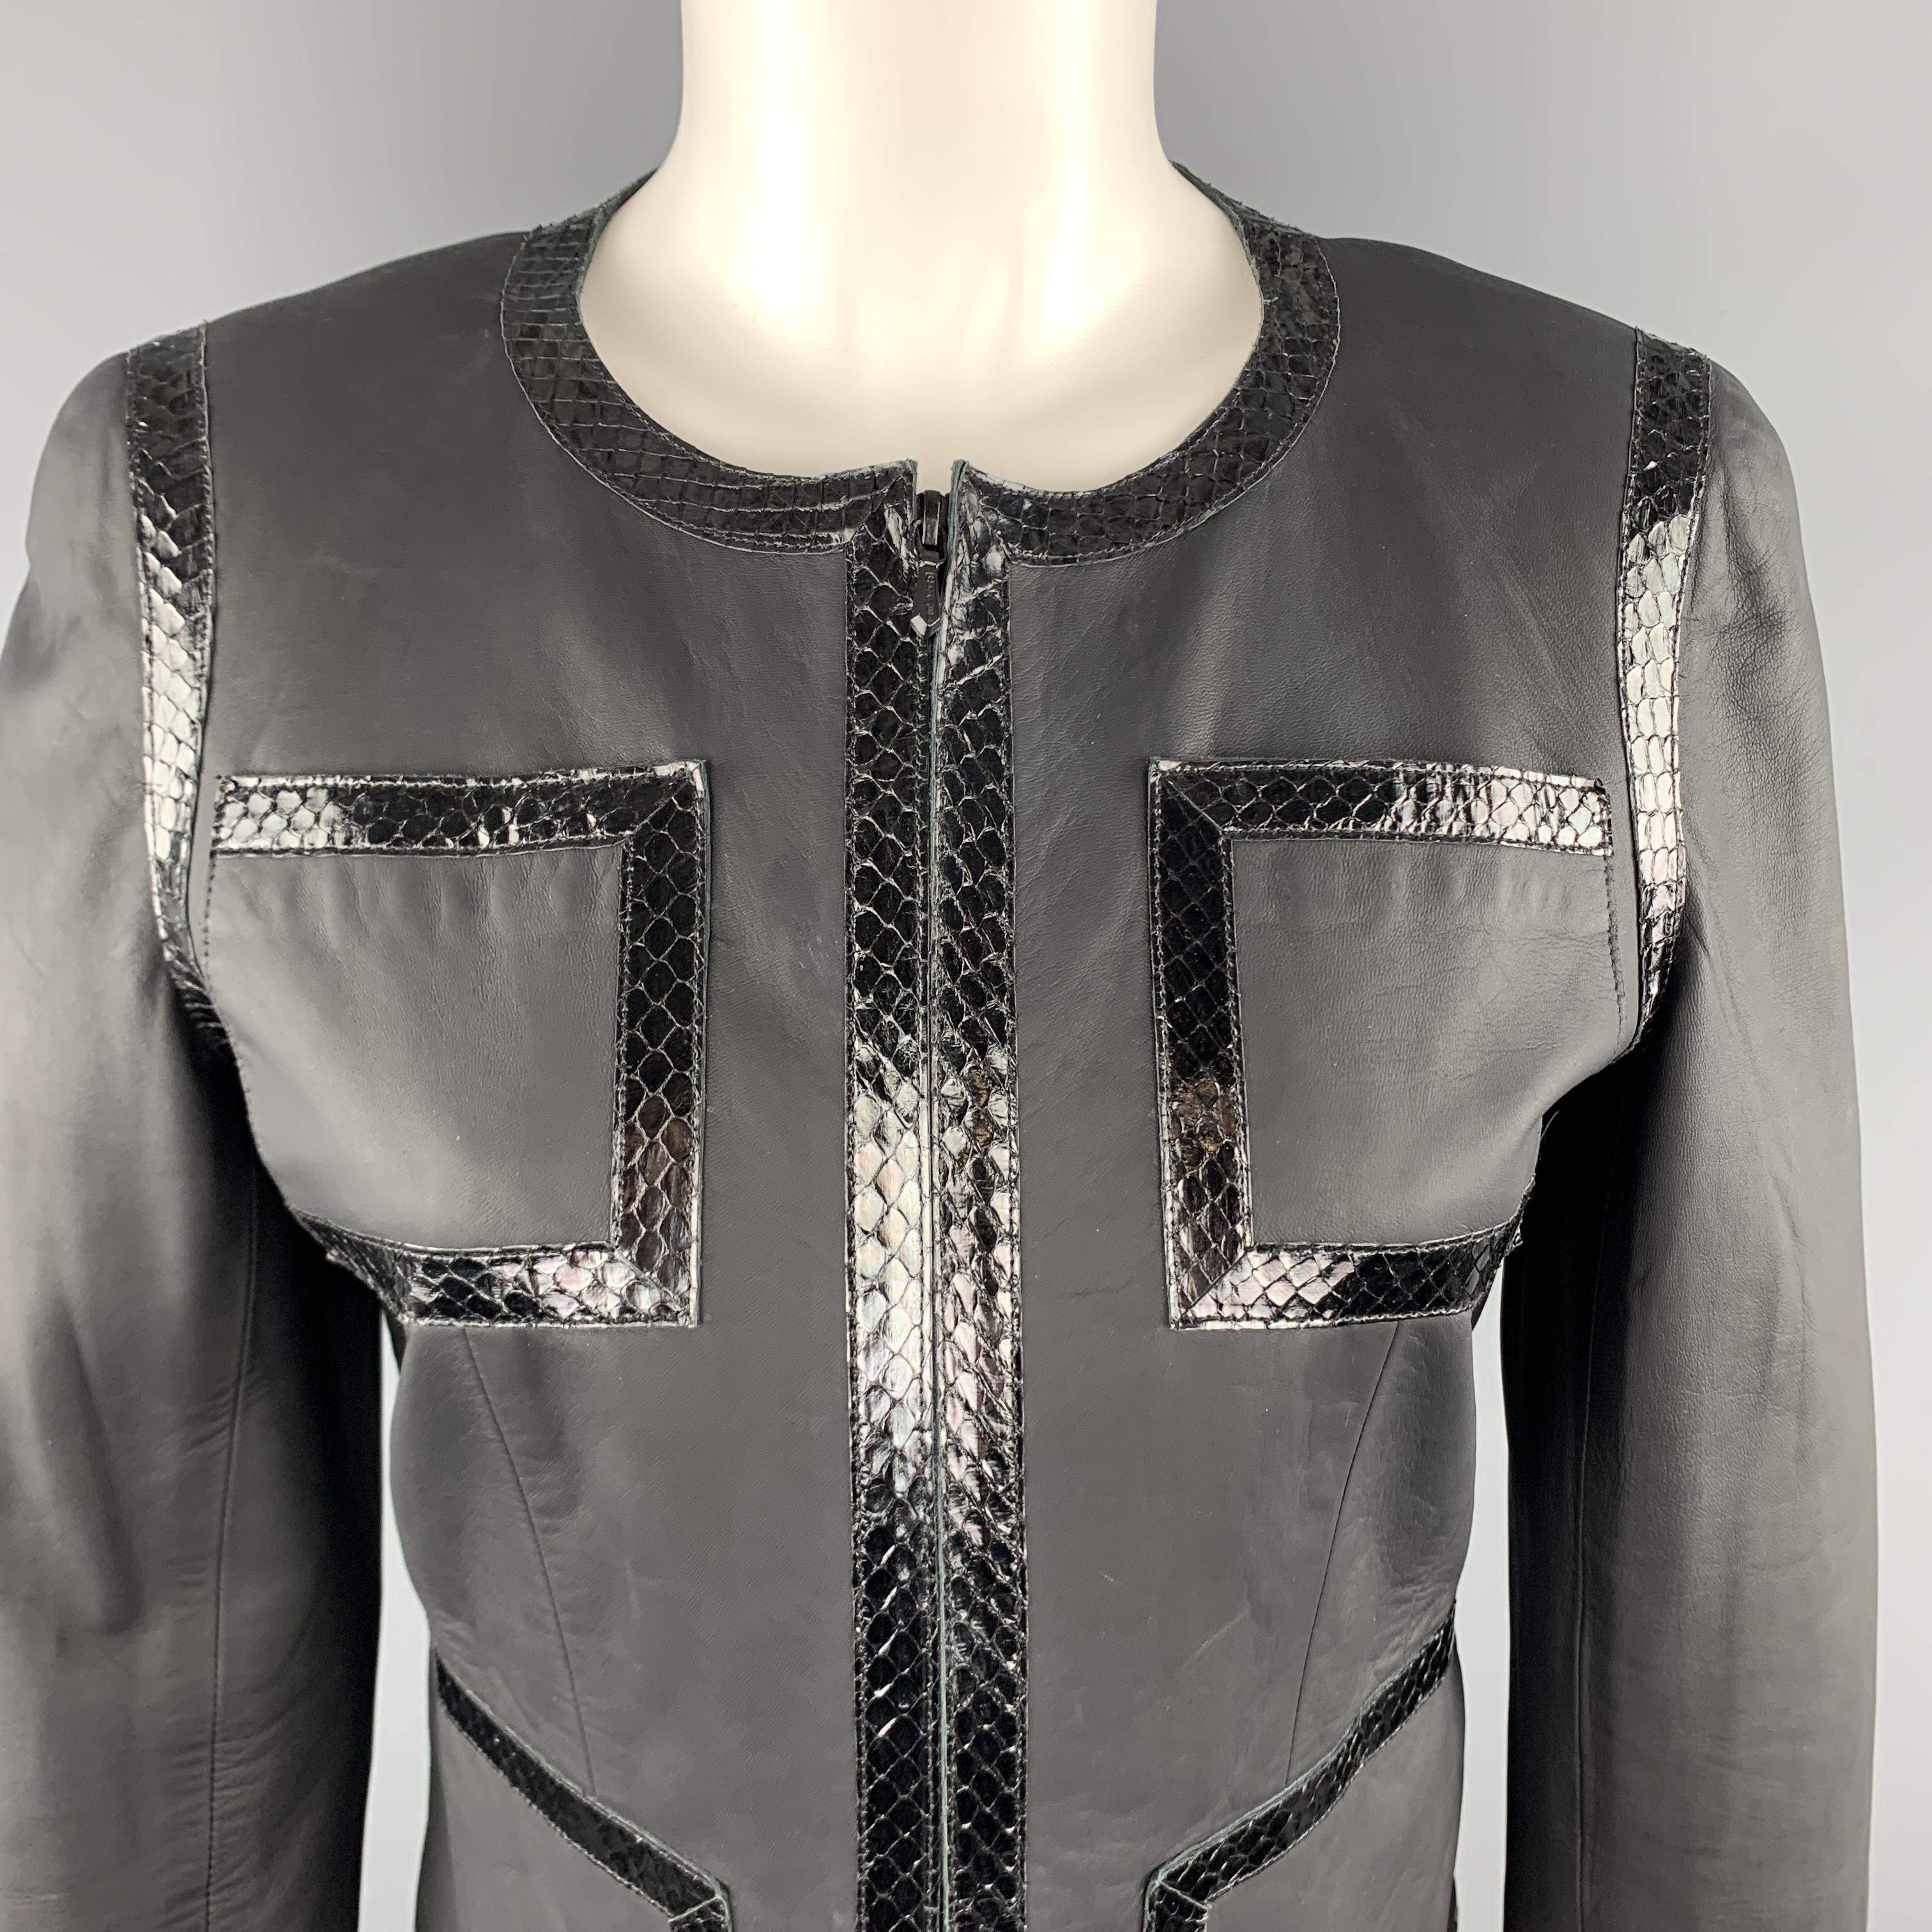 CHANEL Spring 2004 jacket comes in smooth matte leather with a collarless Coco Chanel classic cropped silhouette, zip front, patch pockets, slit cuff sleeves, and black snake leather trim. Minor wear. As-is. Made in France.

Very Good Pre-Owned